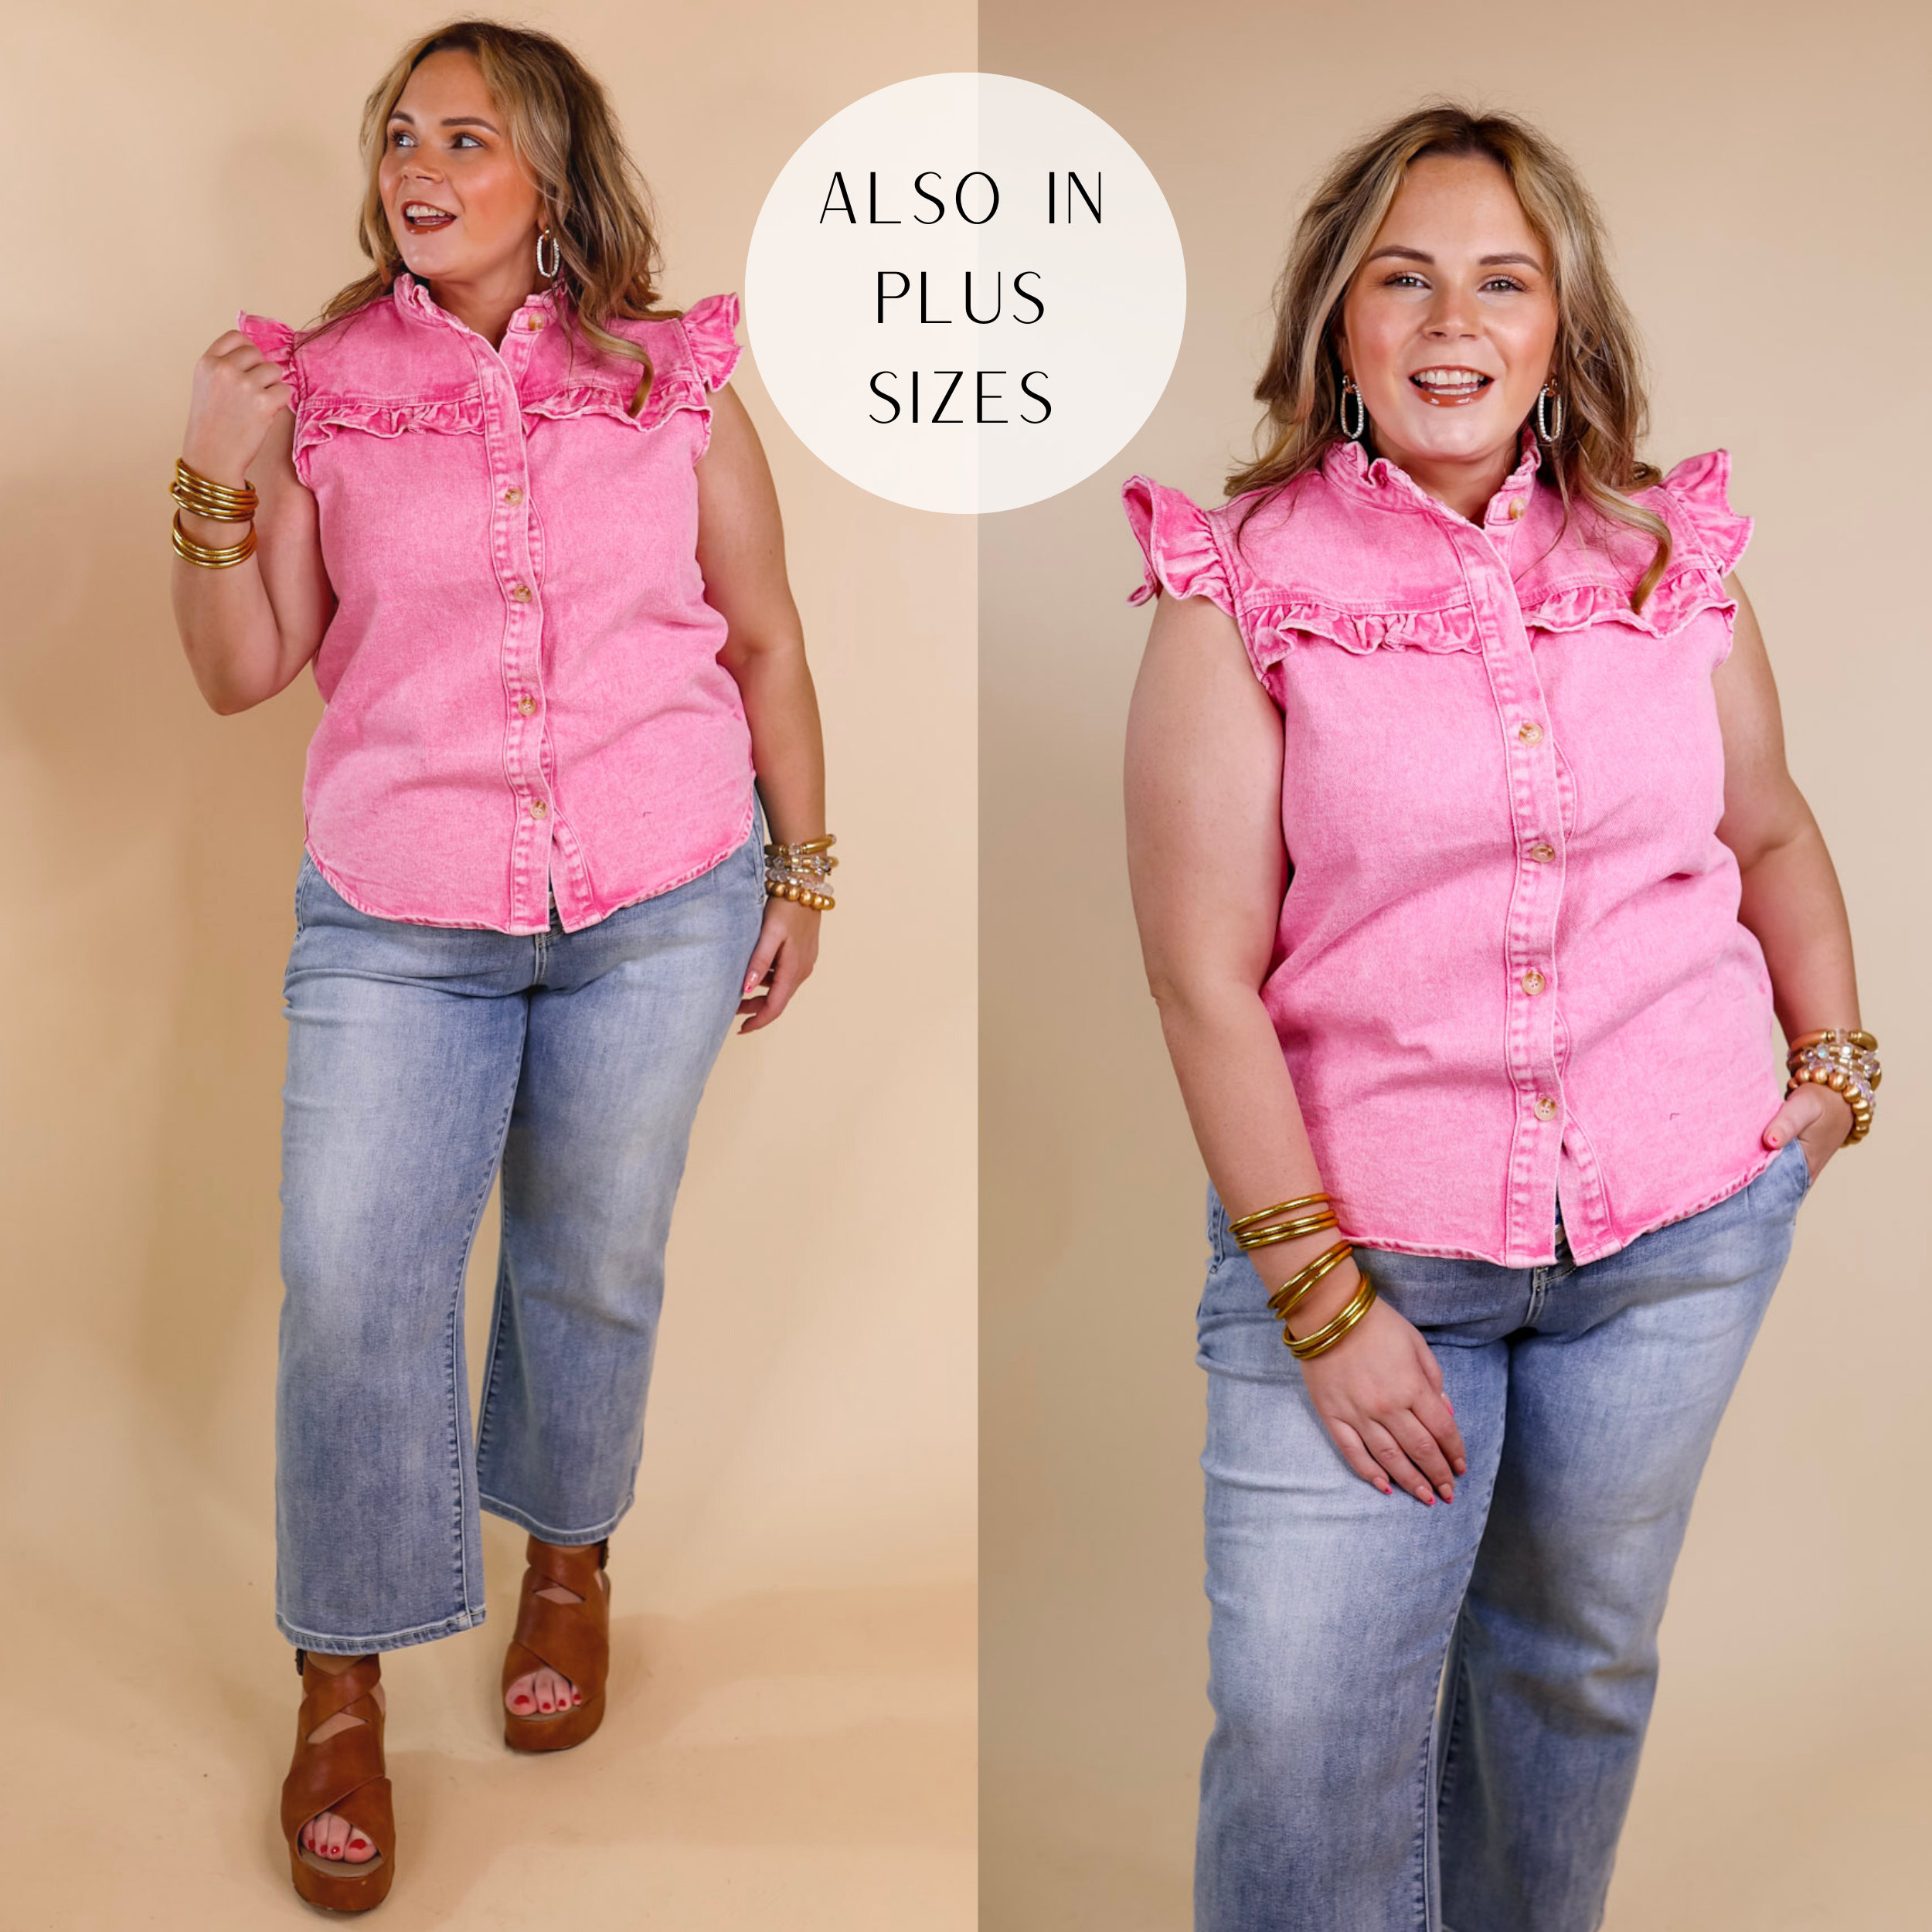 Model is wearing a button up pink denim top with ruffle cap sleeves and ruffle across the bust. Model has it paired light wash cropped jeans, tan wedges, and gold jewelry.